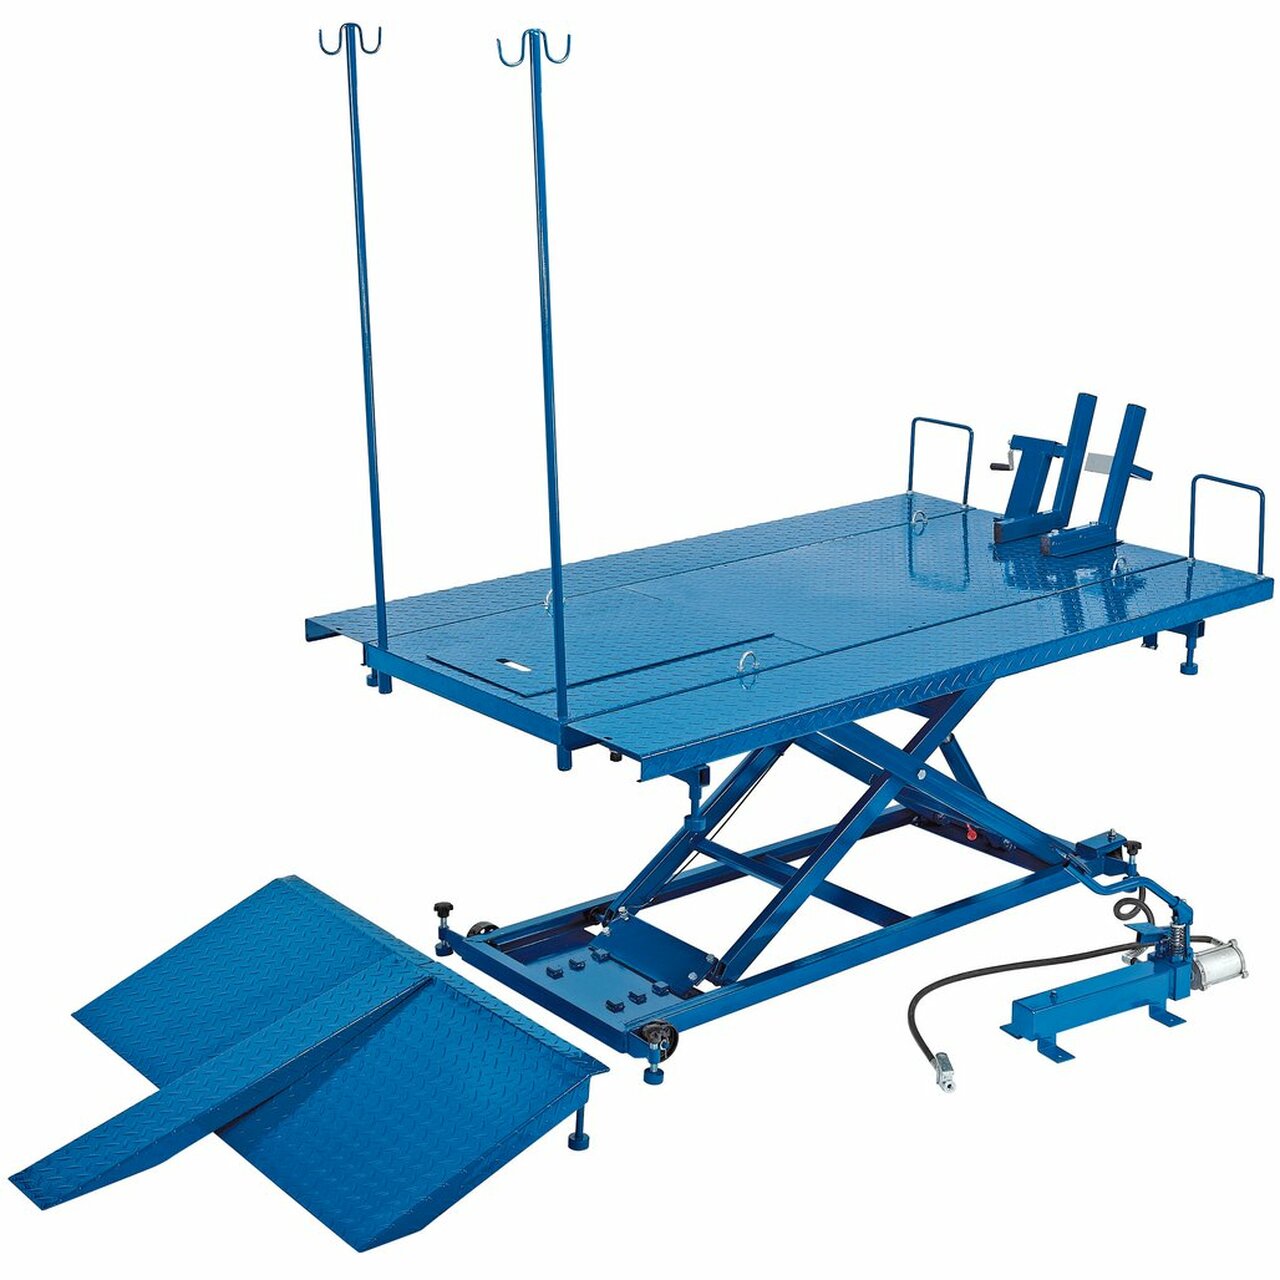 Draper 37190 680Kg Motorcycle Pneumatic and Hydraulic Operation Lift Table - Heavy duty Motorbike lift table